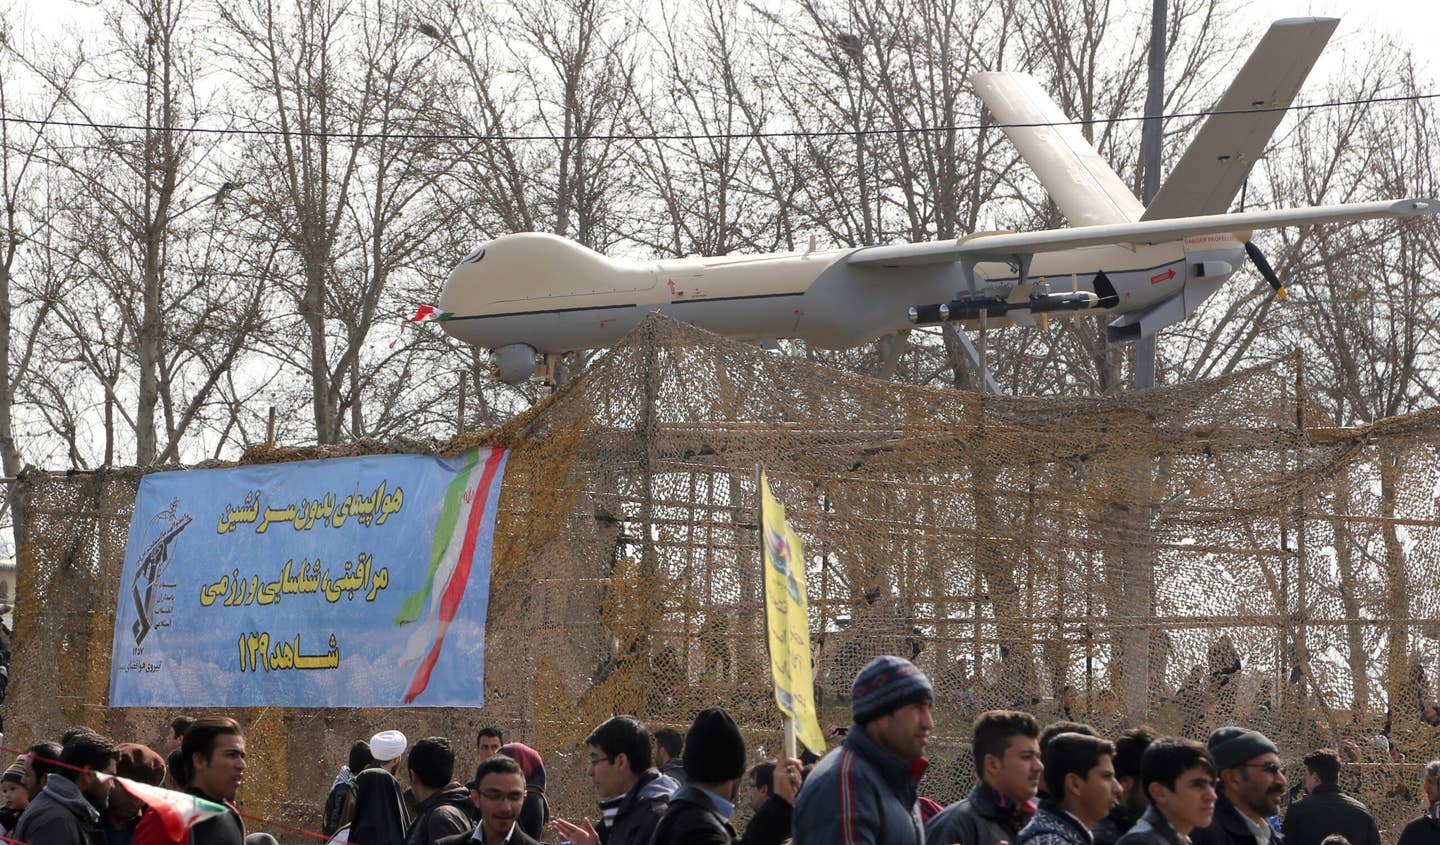 Iranians walk past a Shahed-129 drone during celebrations in Tehran to mark the 37th anniversary of the Islamic revolution on February 11, 2016. <em>Photo by ATTA KENARE/AFP via Getty Images</em>